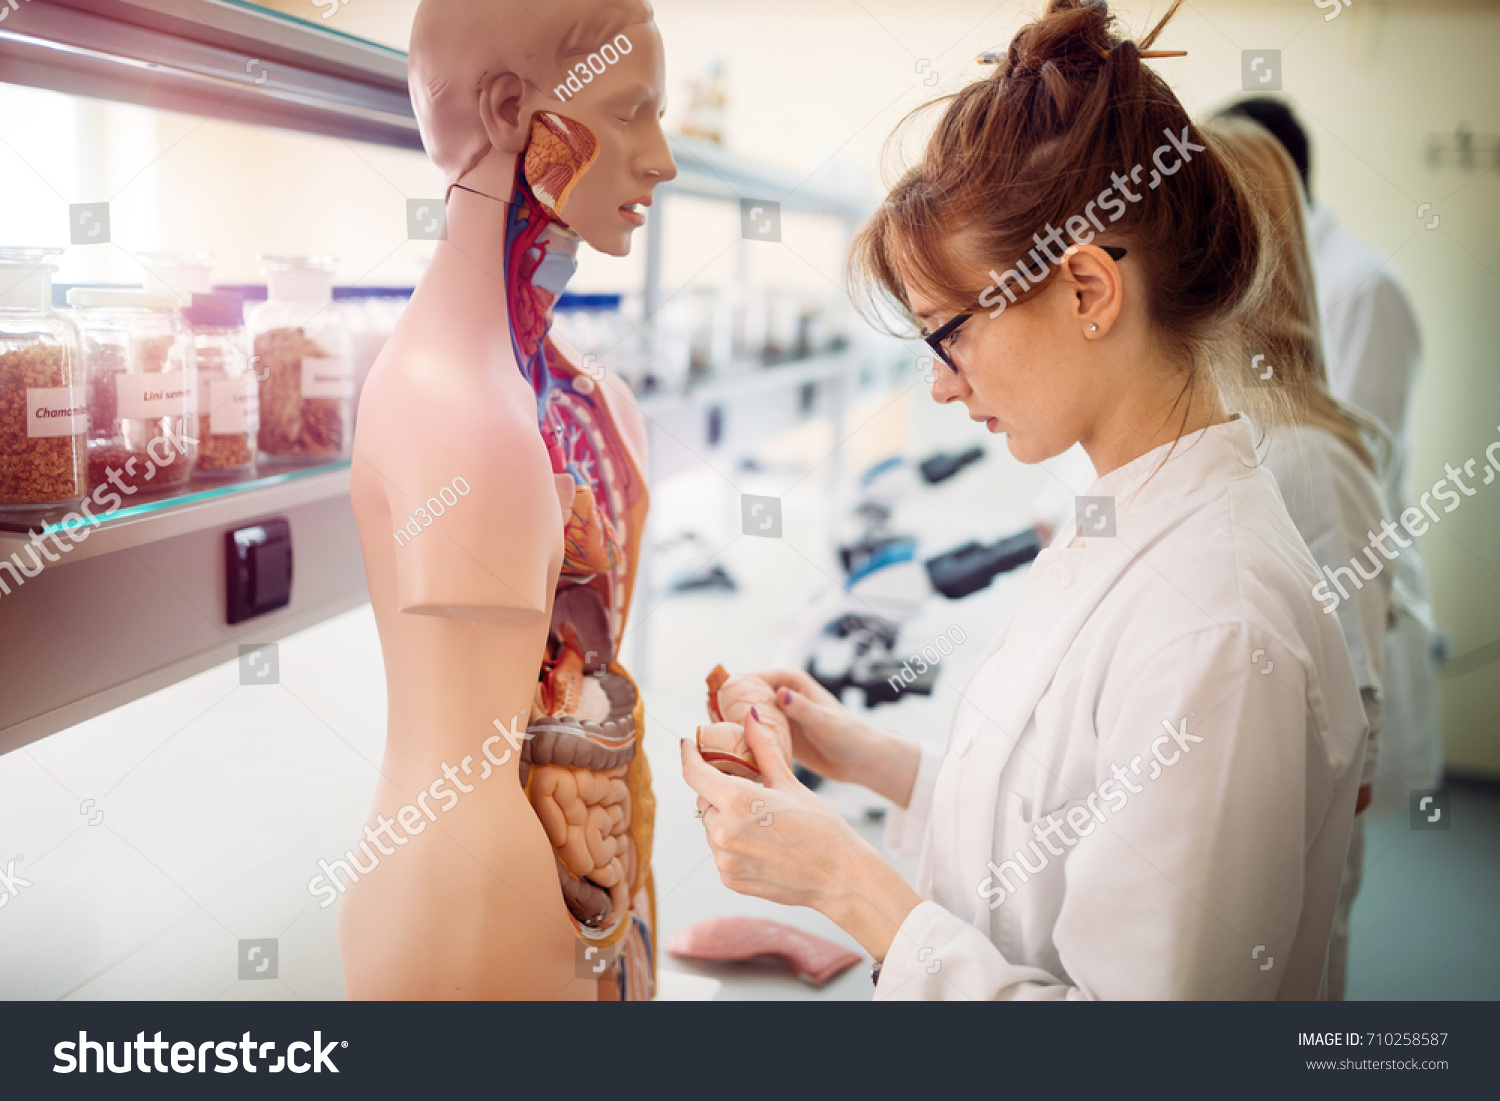 Student of medicine examining anatomical model in lab #710258587